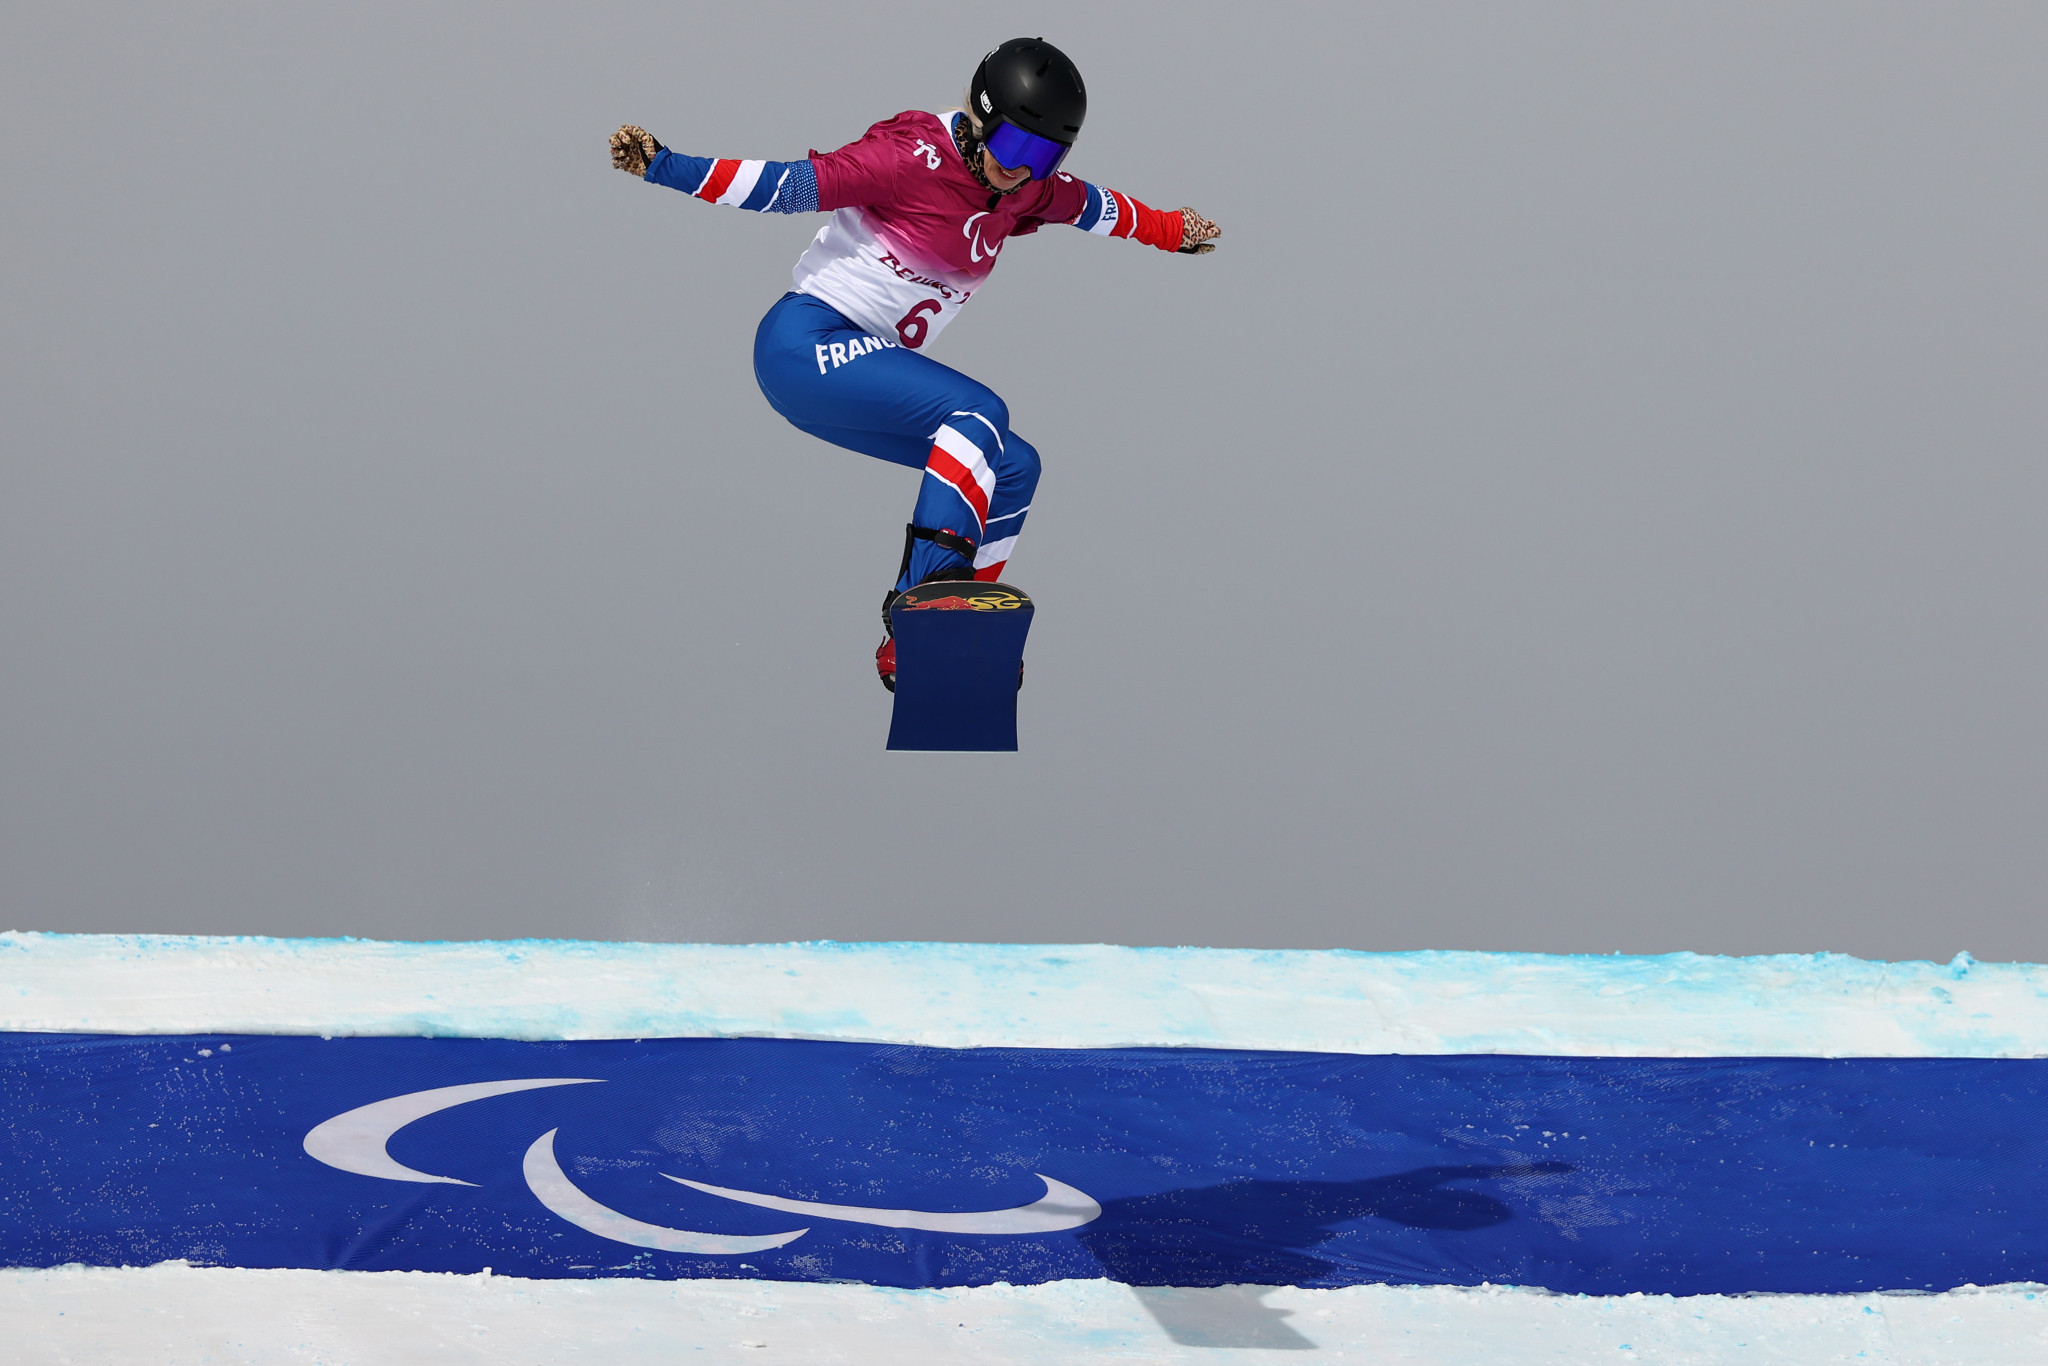 France's Cécile Hernandez topped the SB-LL2 qualification in the snowboard cross ©Getty Images